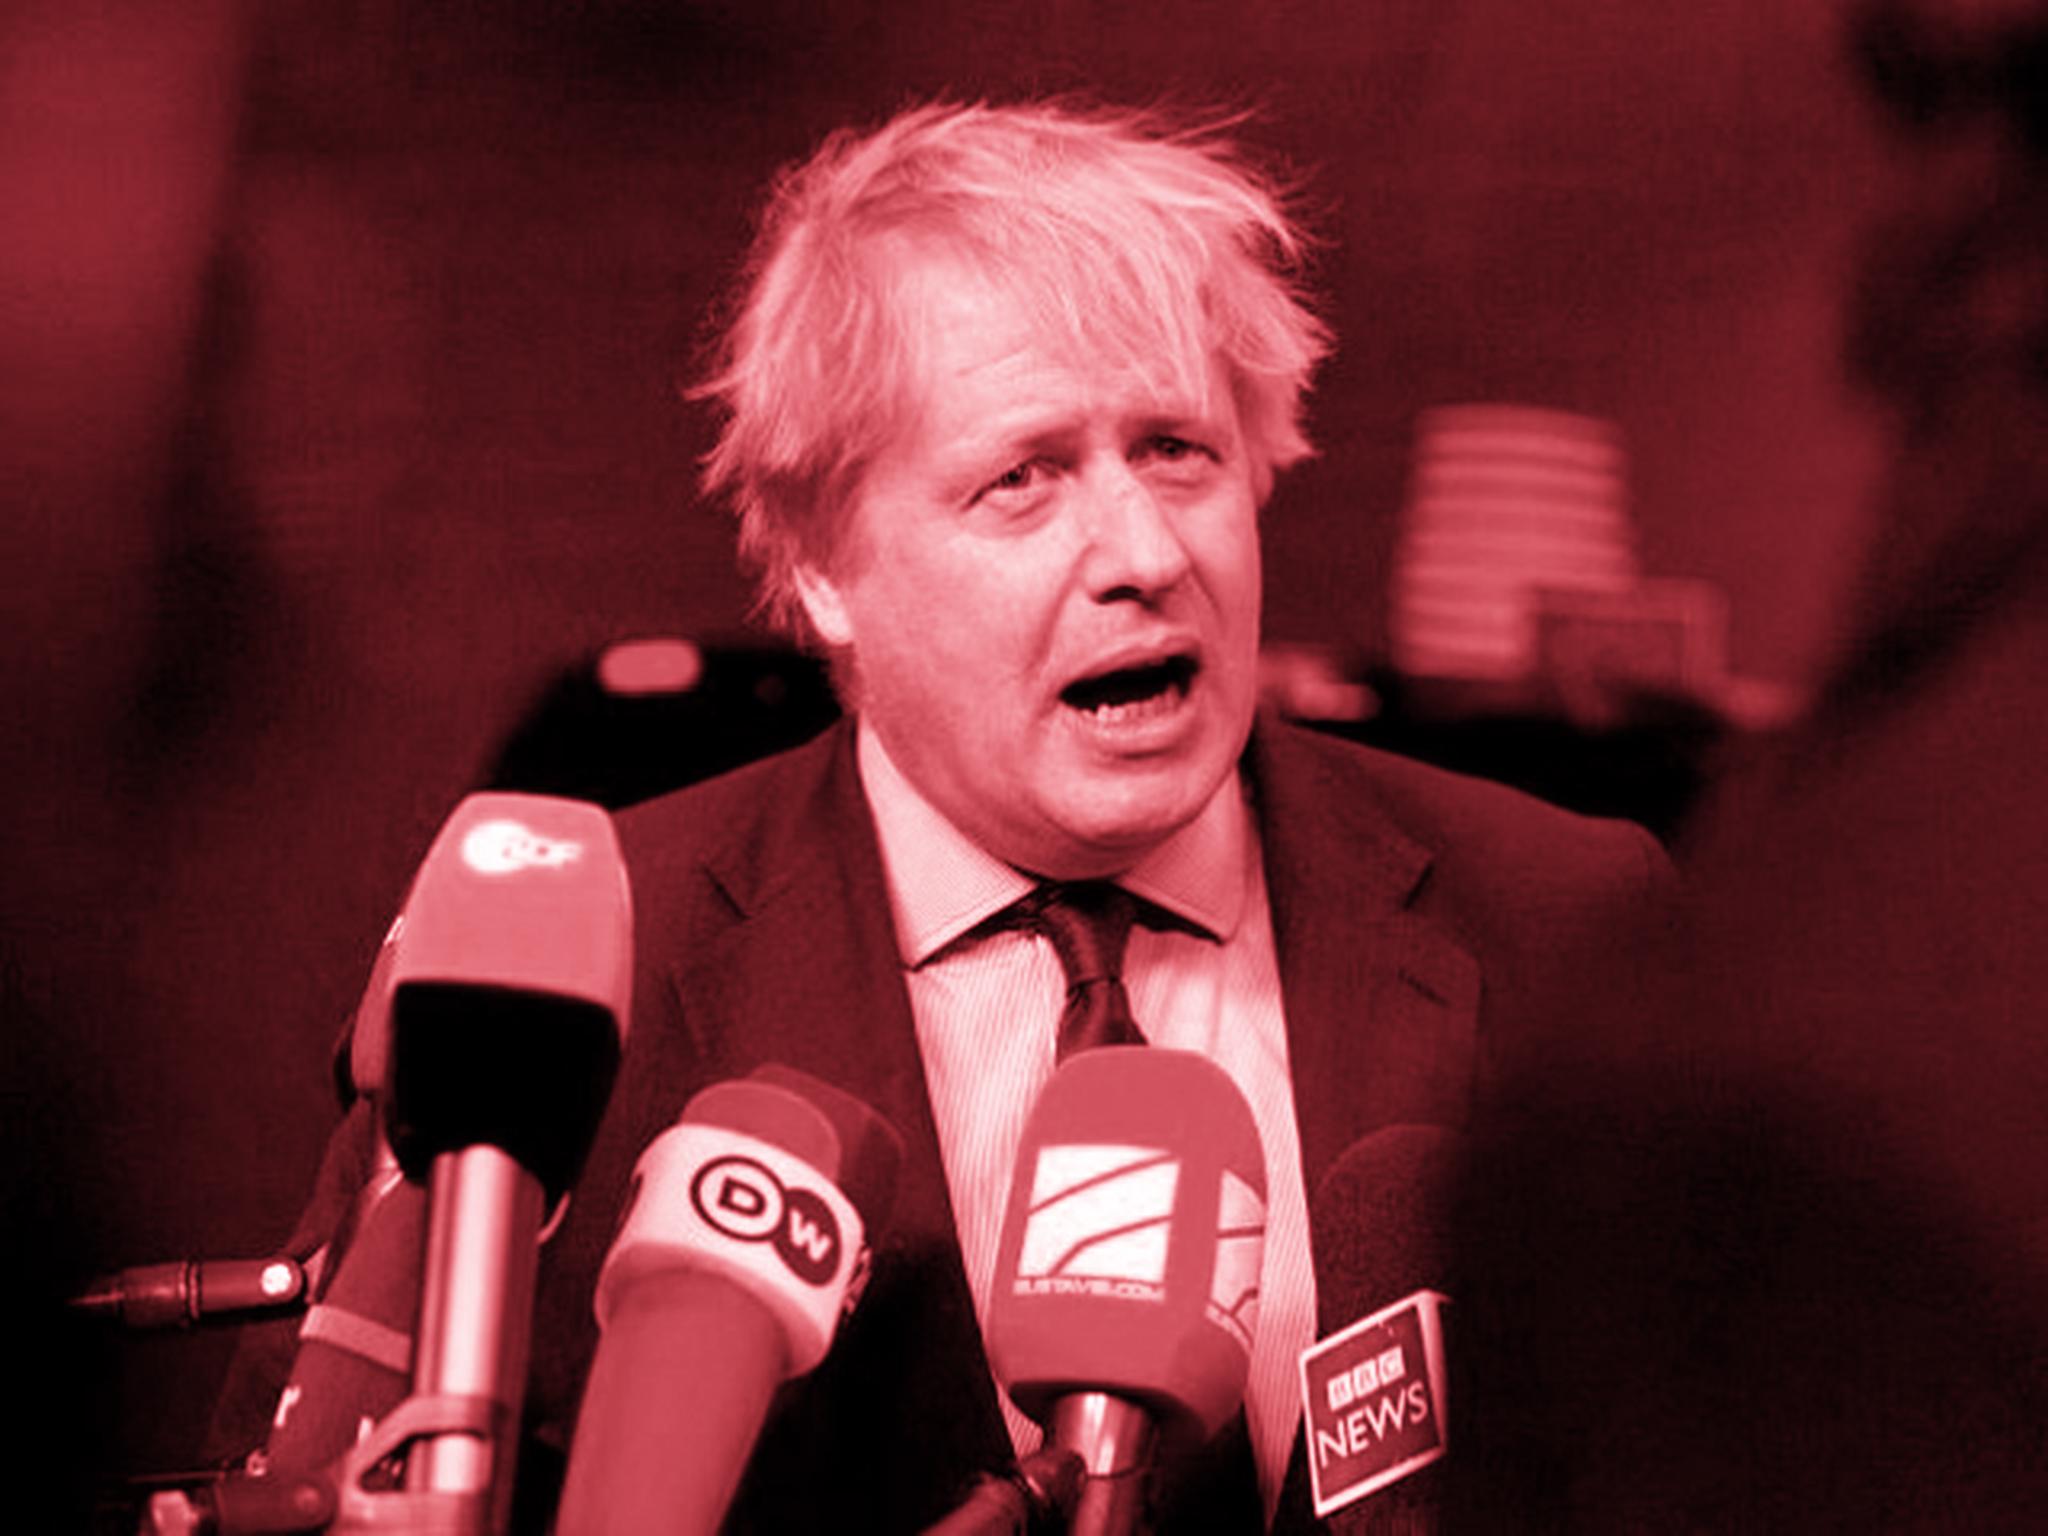 Boris Johnson is facing calls for an inquiry into whether he broke the ministerial code